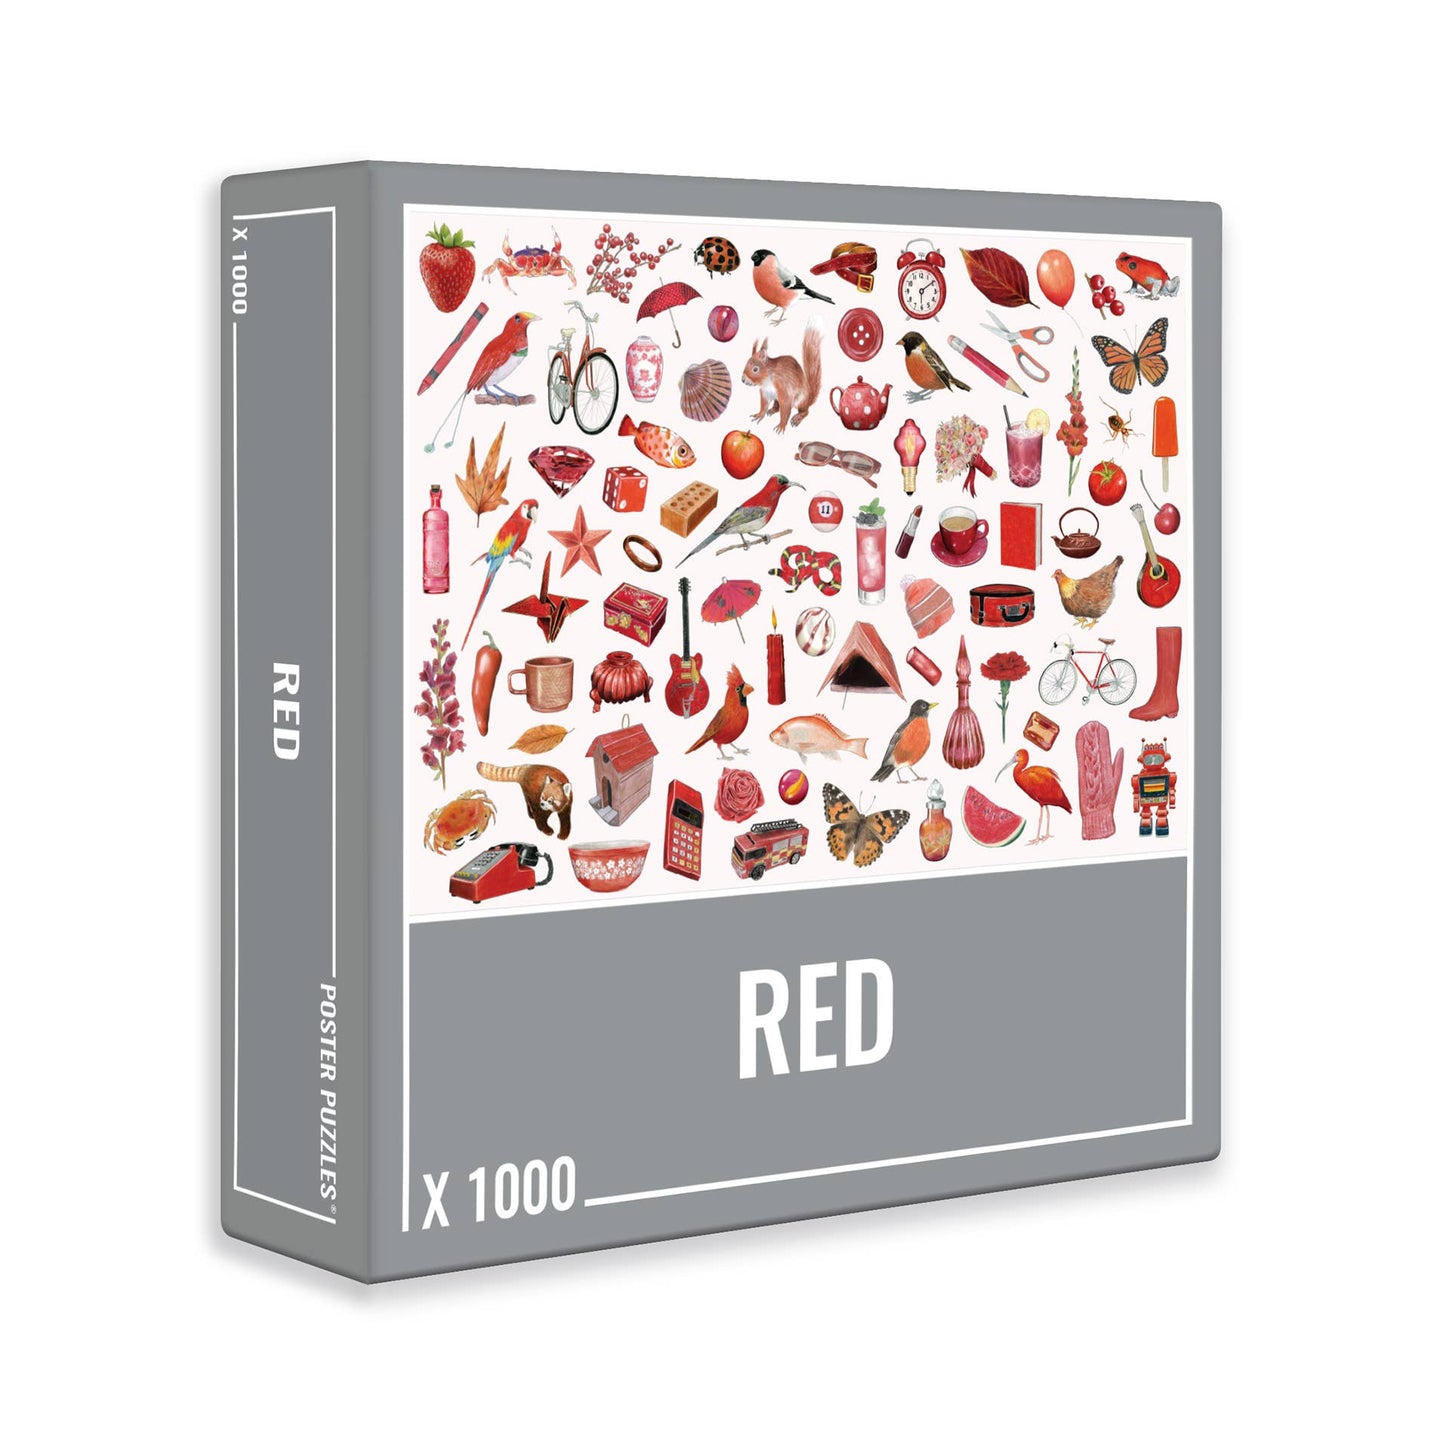 Cloudberries - Red - 1000 Piece Jigsaw Puzzle